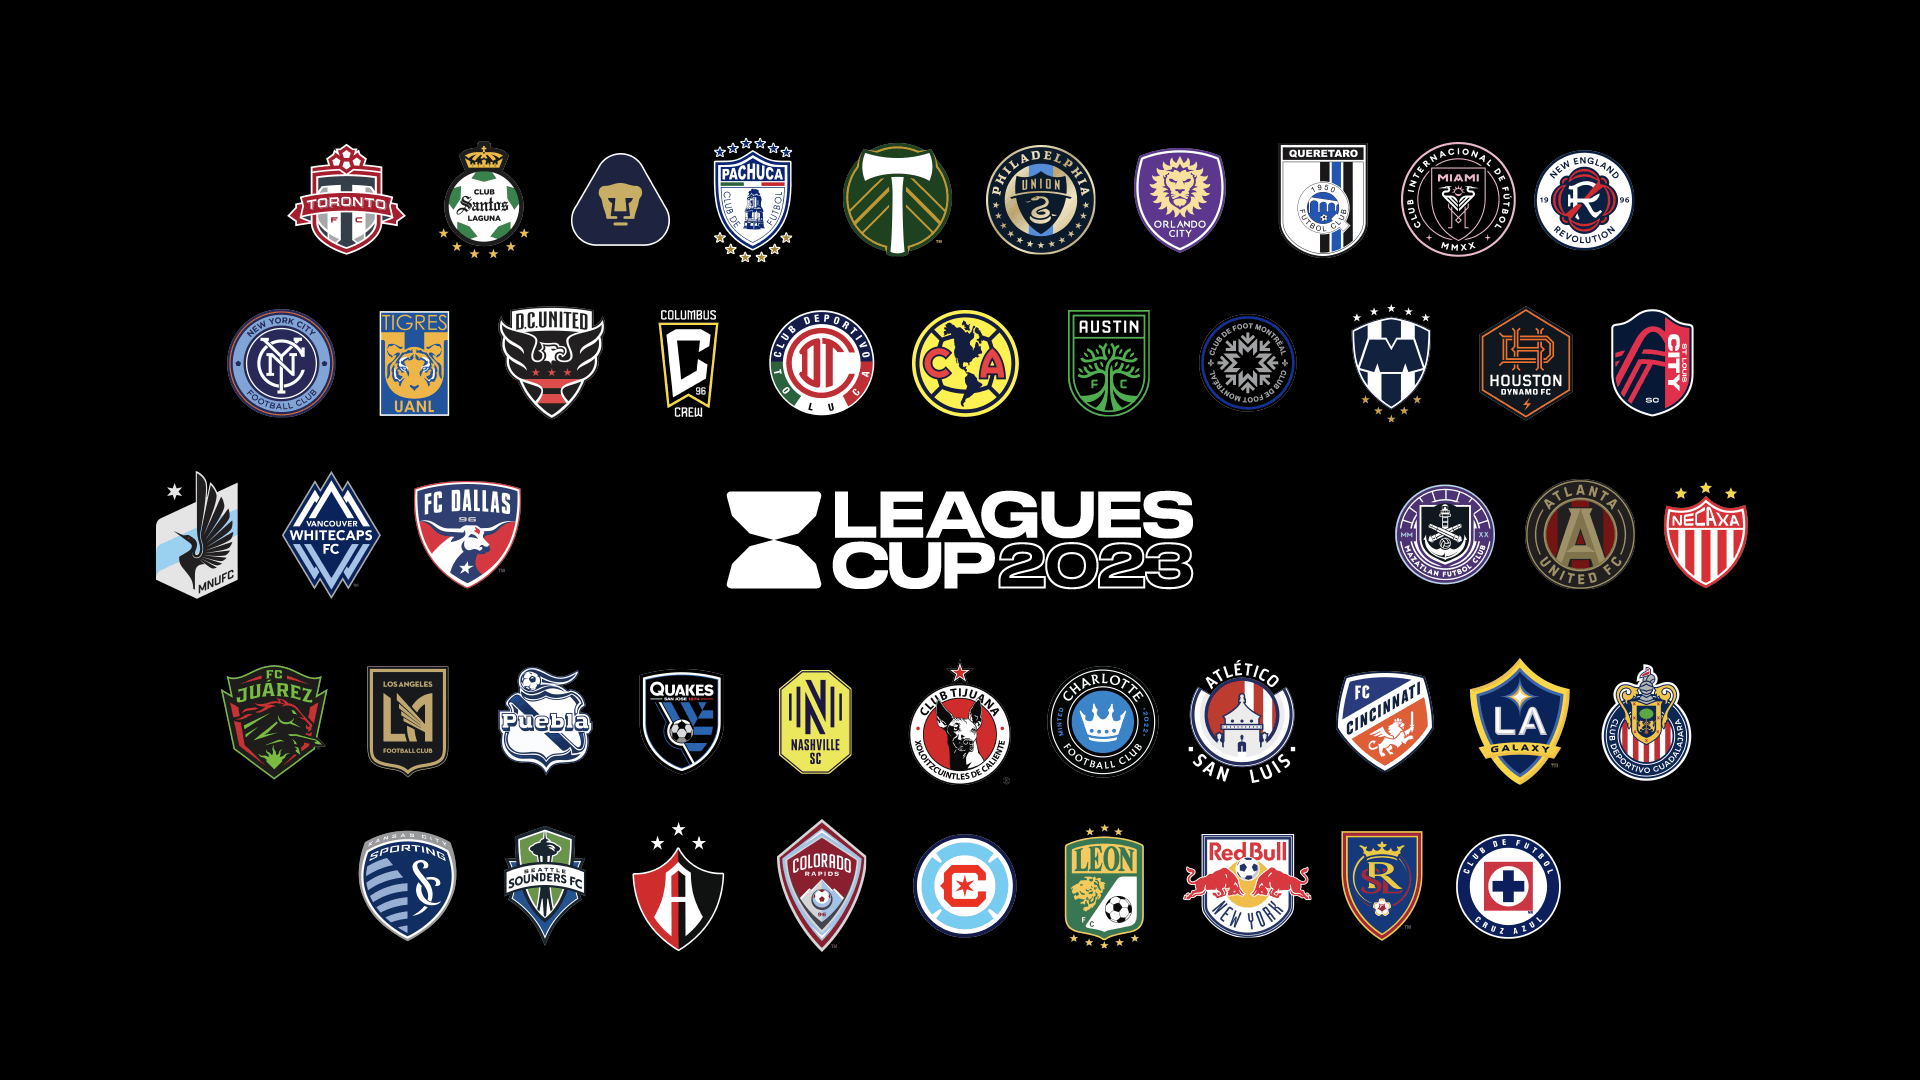 Leagues Cup 2023 with all team names and logos